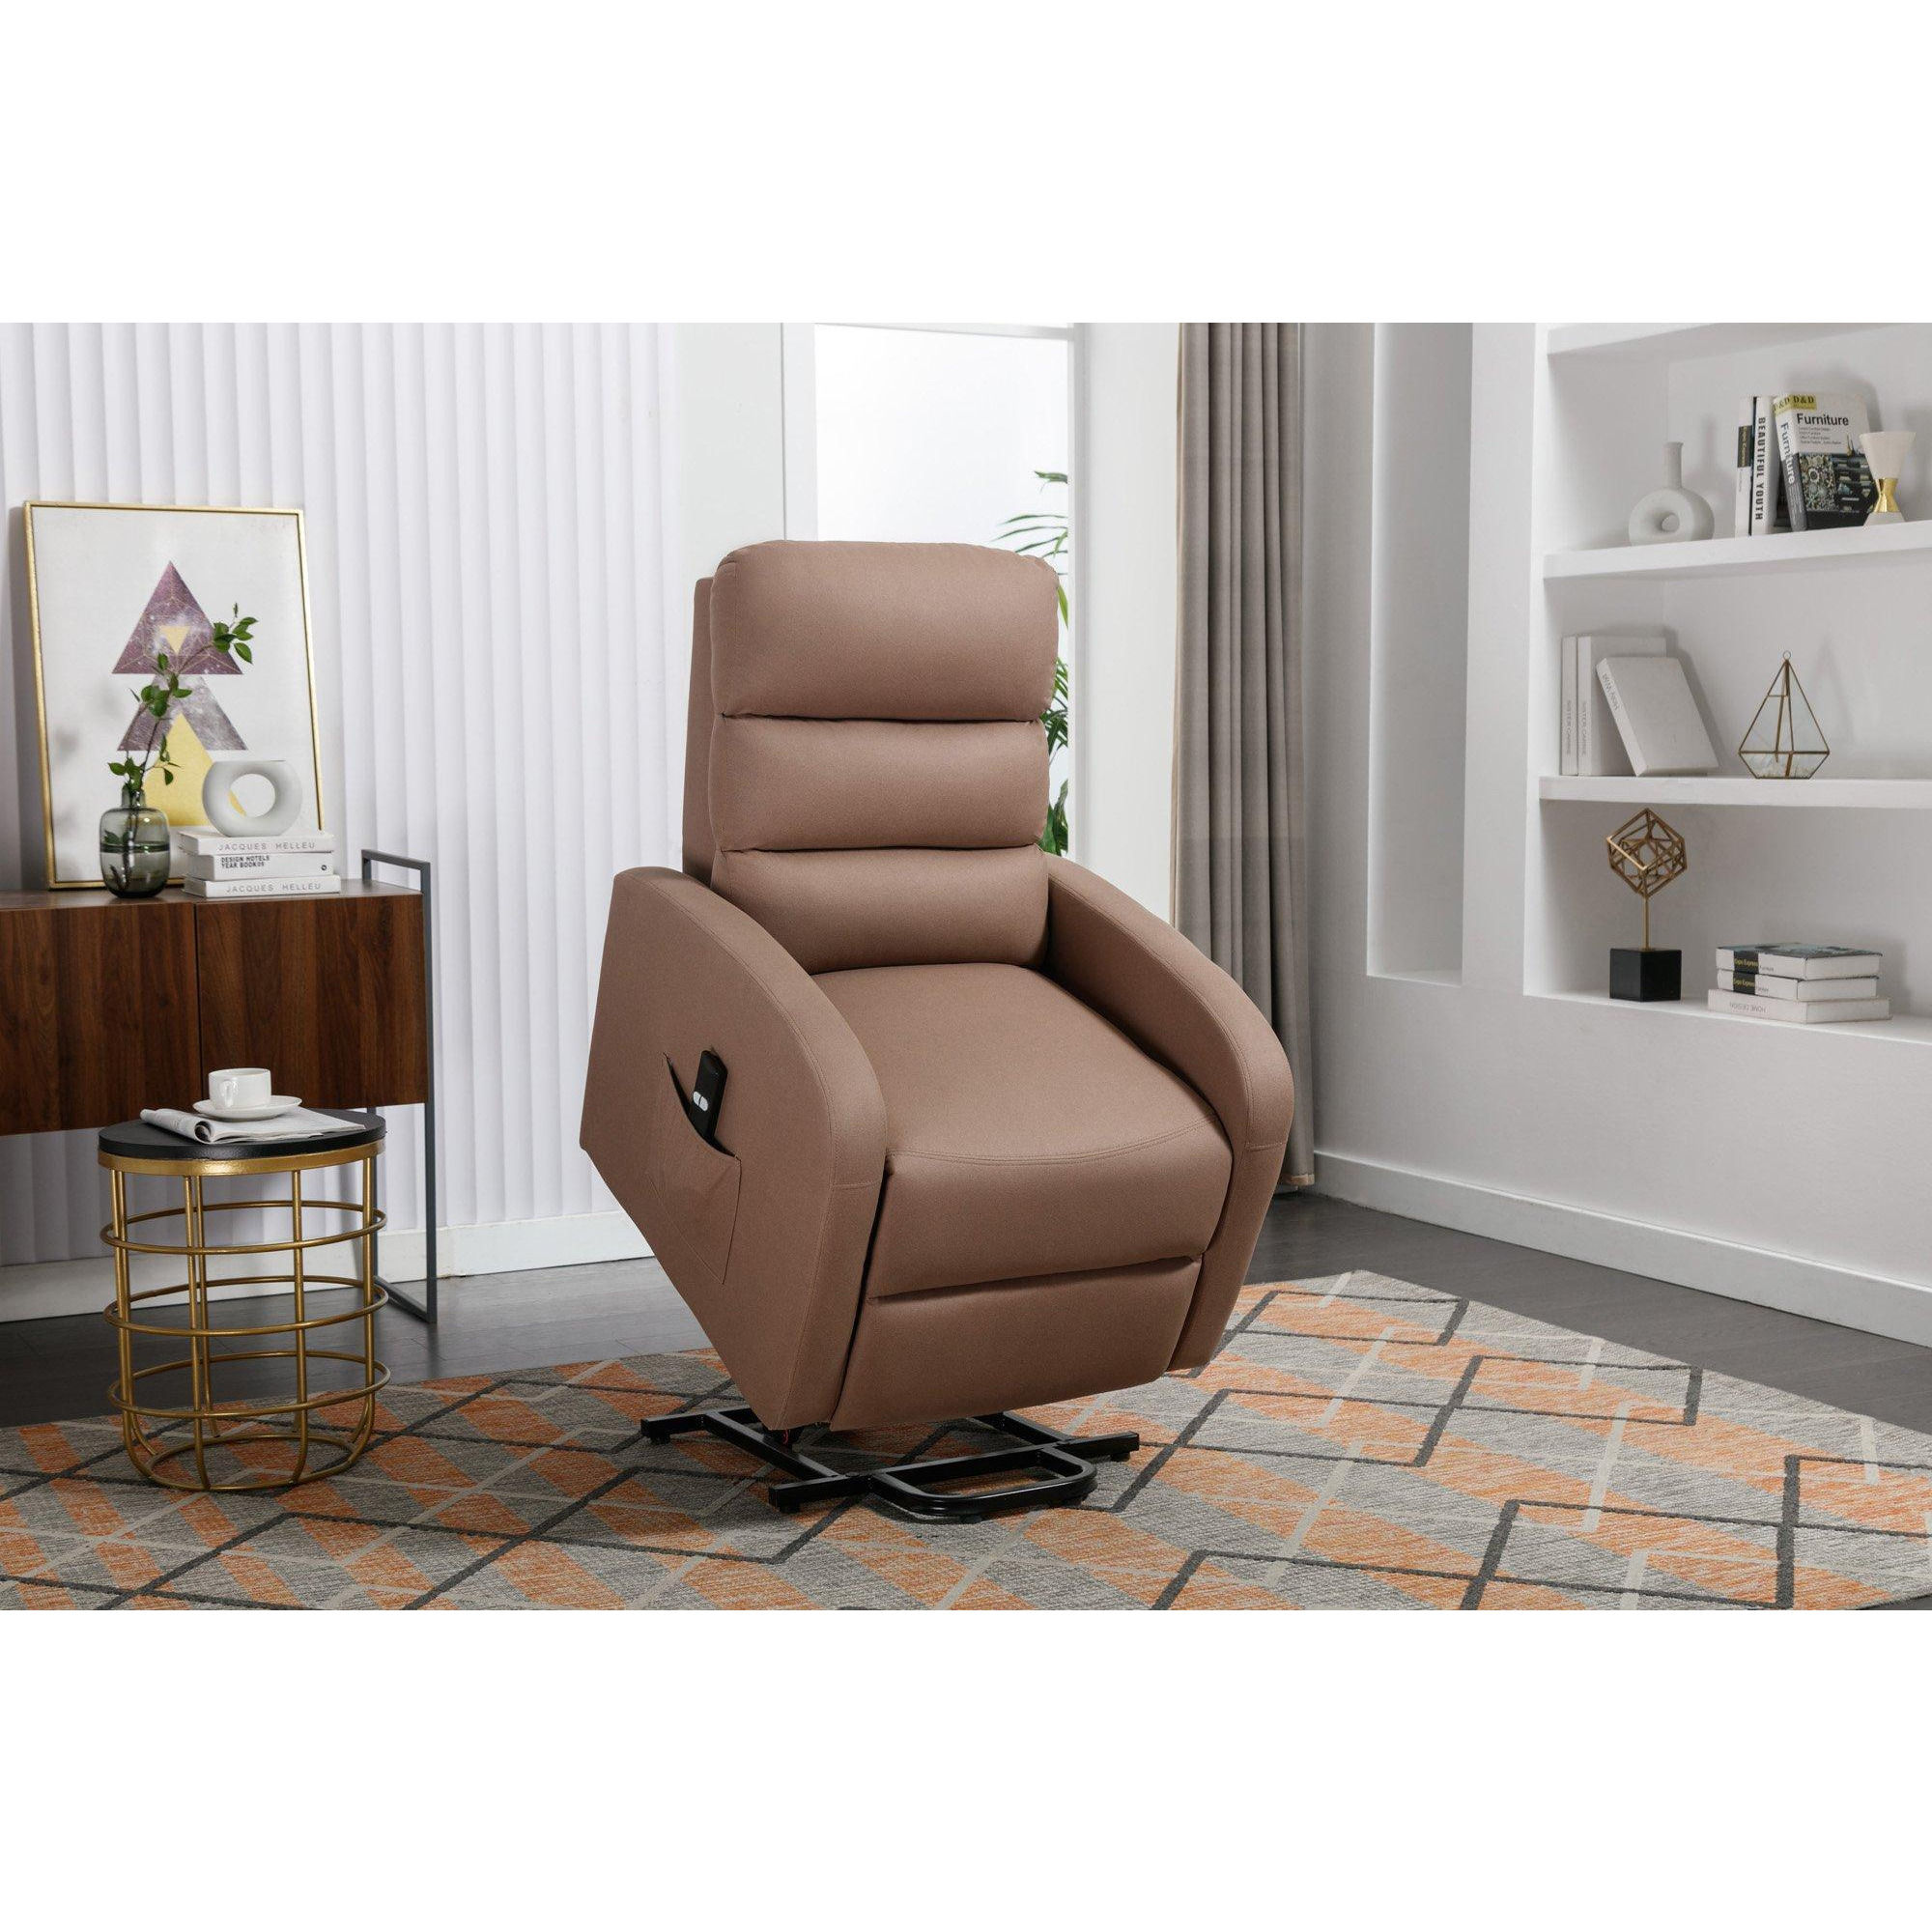 Grace Technology Electric Fabric Single Motor Rise Recliner Chair - image 1